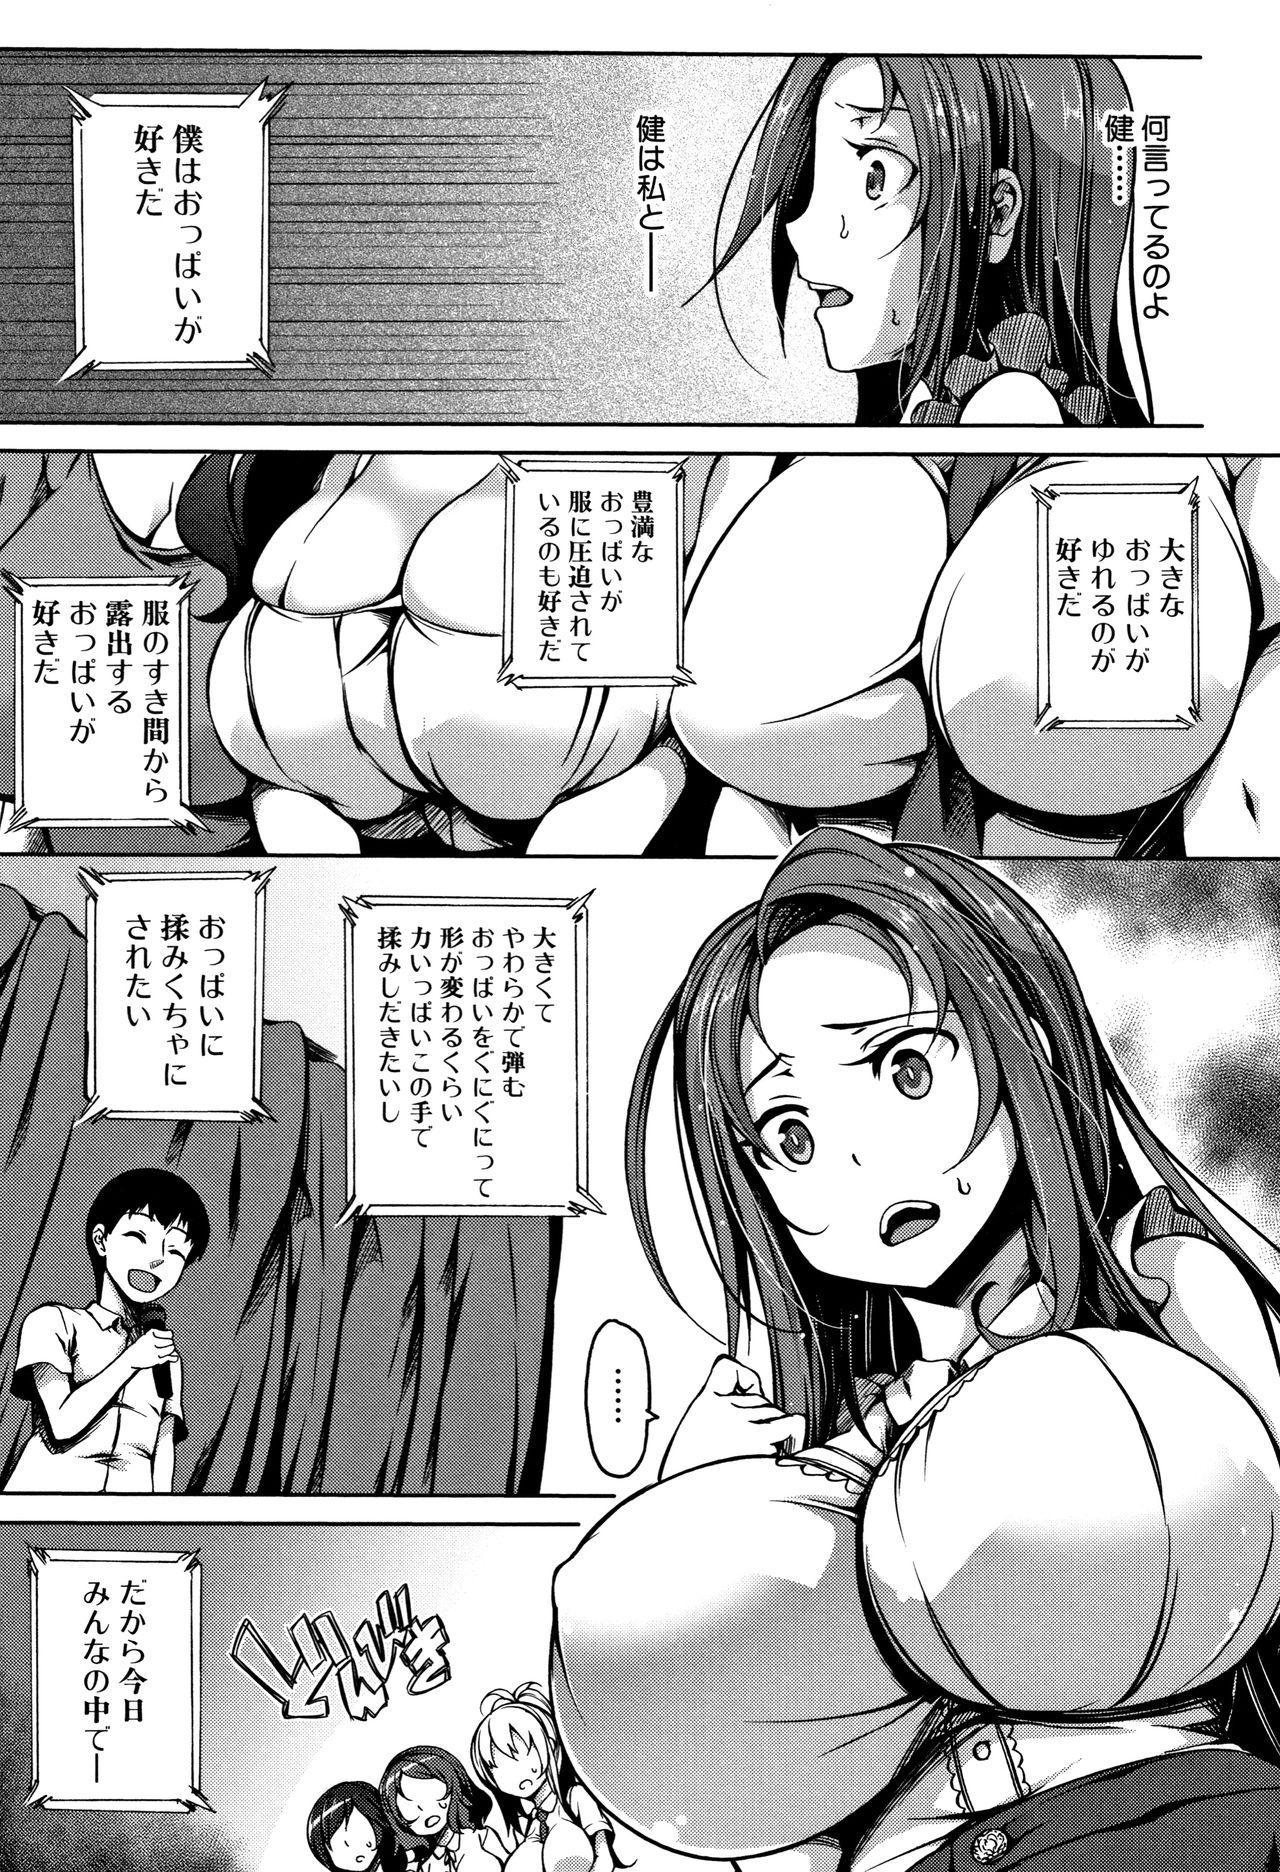 Amature PAIDOLM@STER! Spy Camera - Page 10